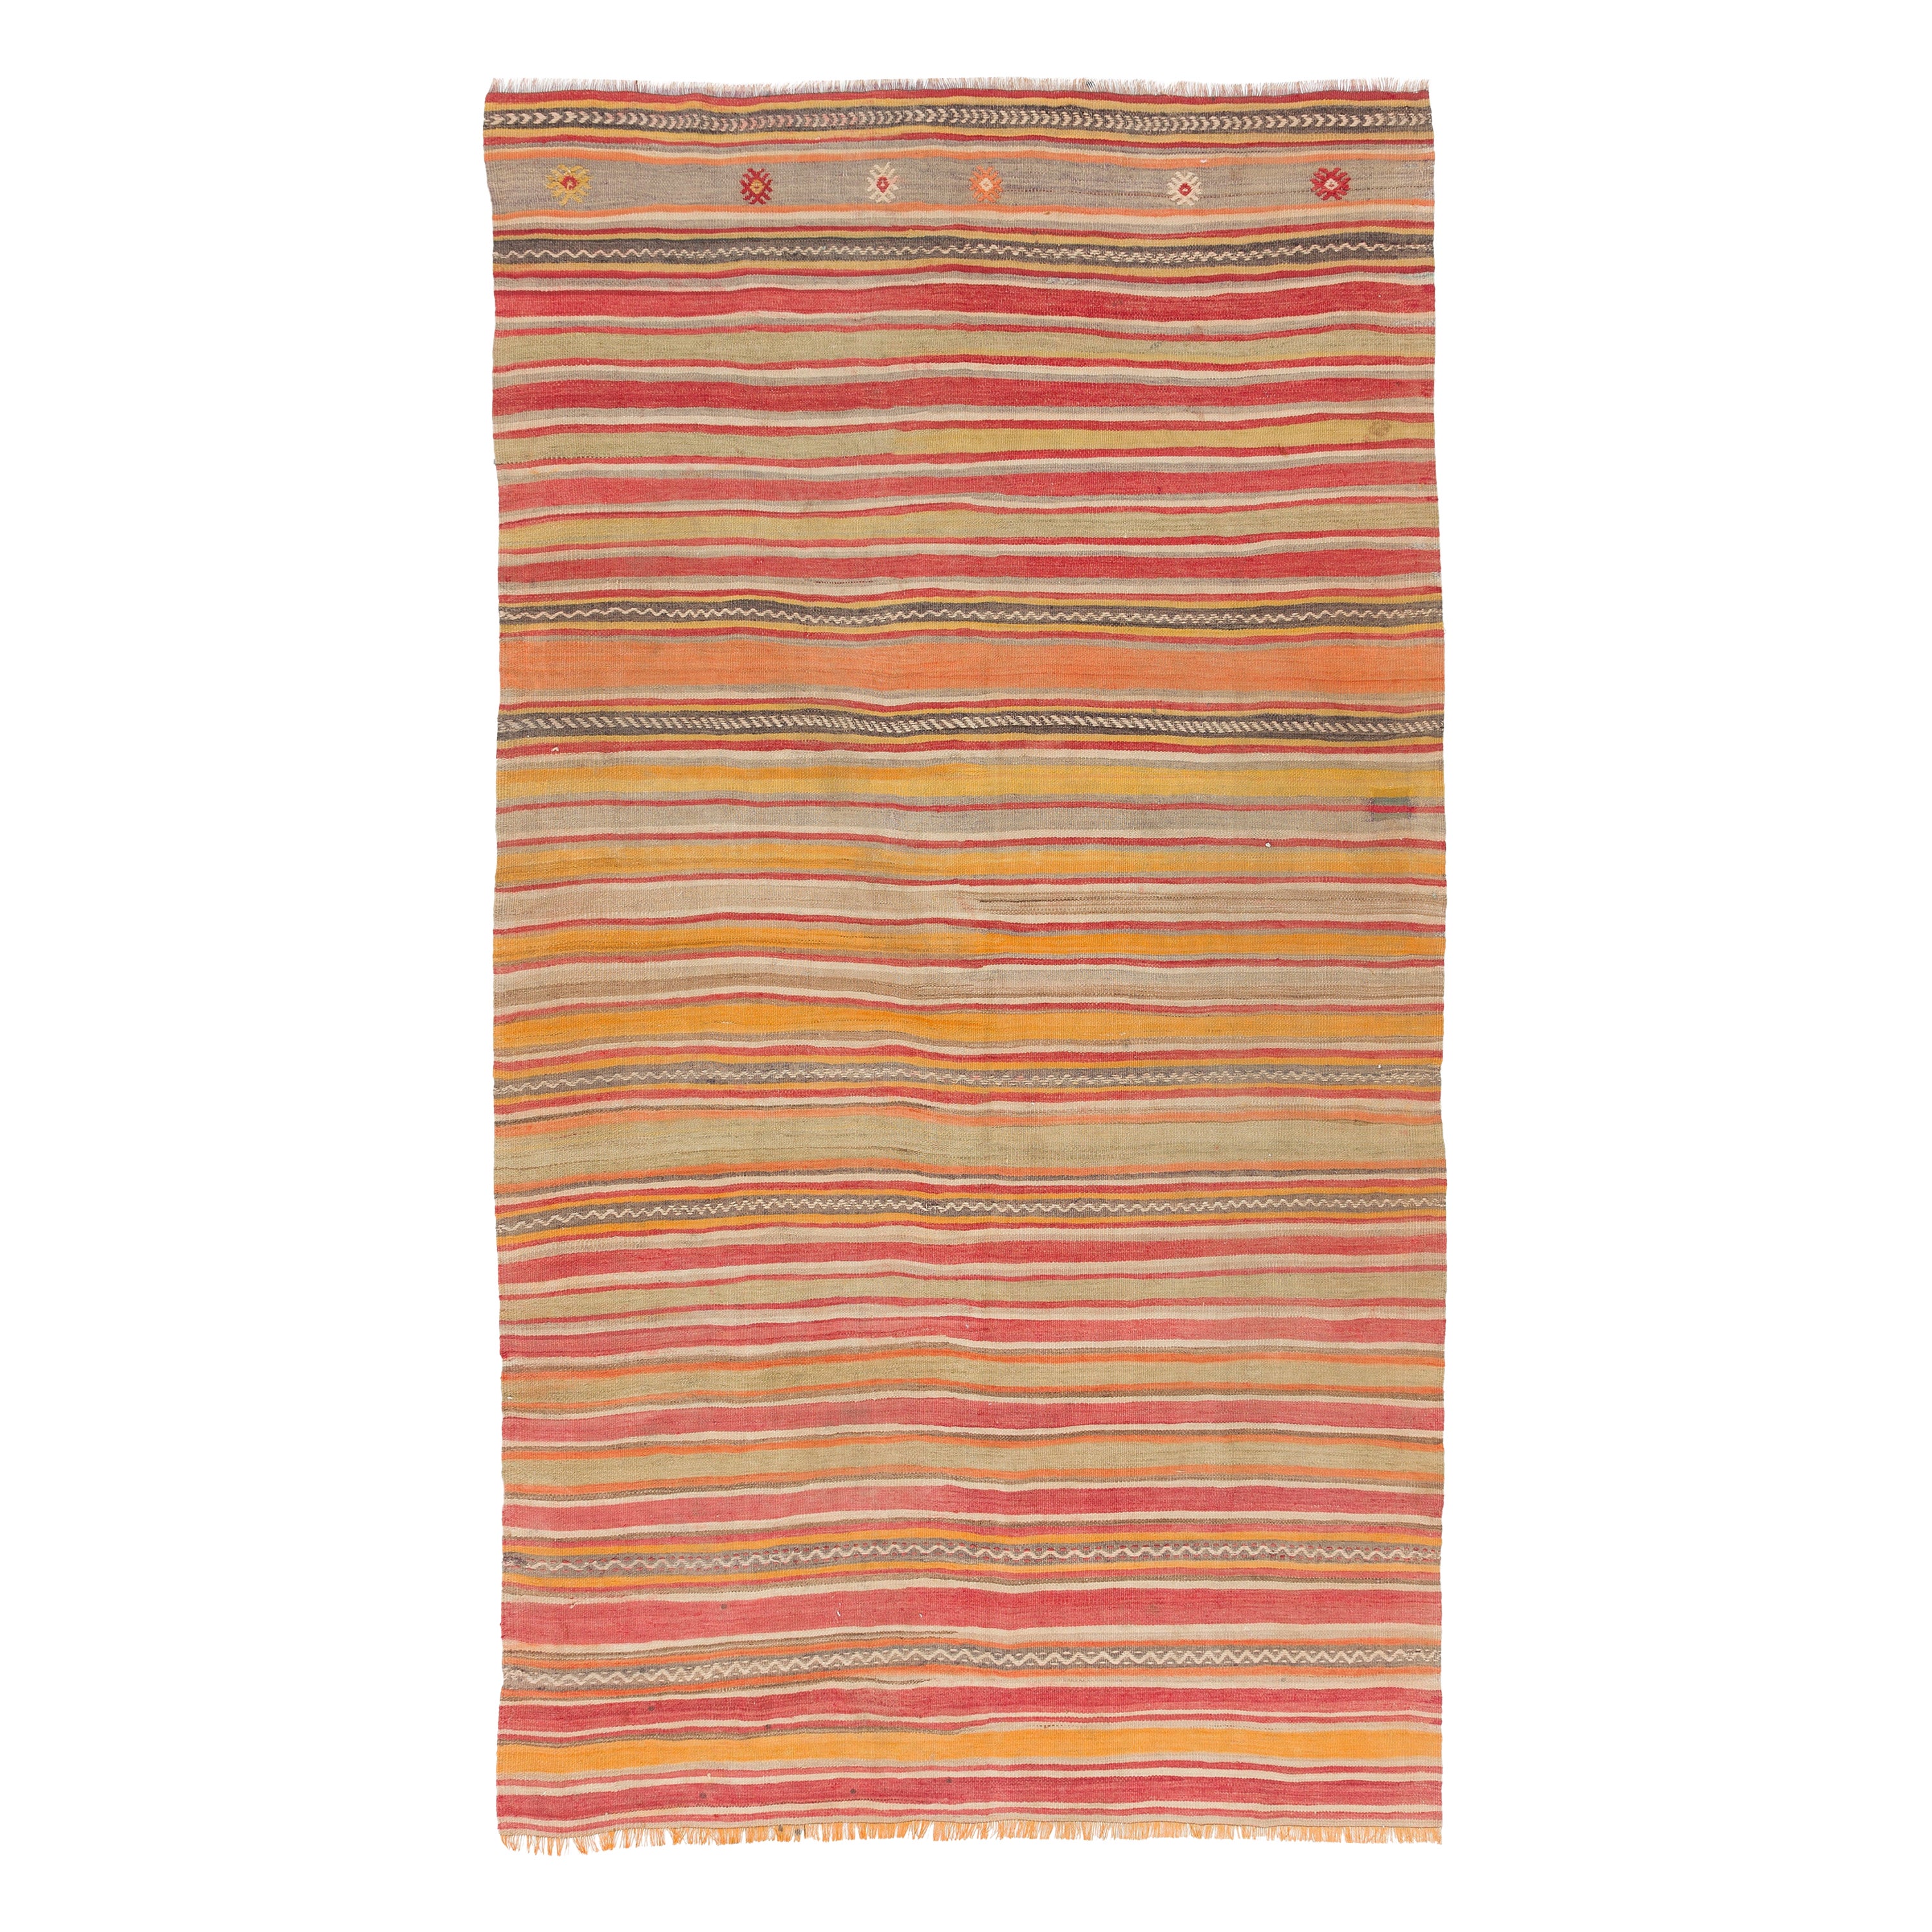 5.5x9.6 Ft Vintage Striped Turkish Kilim Rug, 100% Wool, Both Sides Can Be Used For Sale